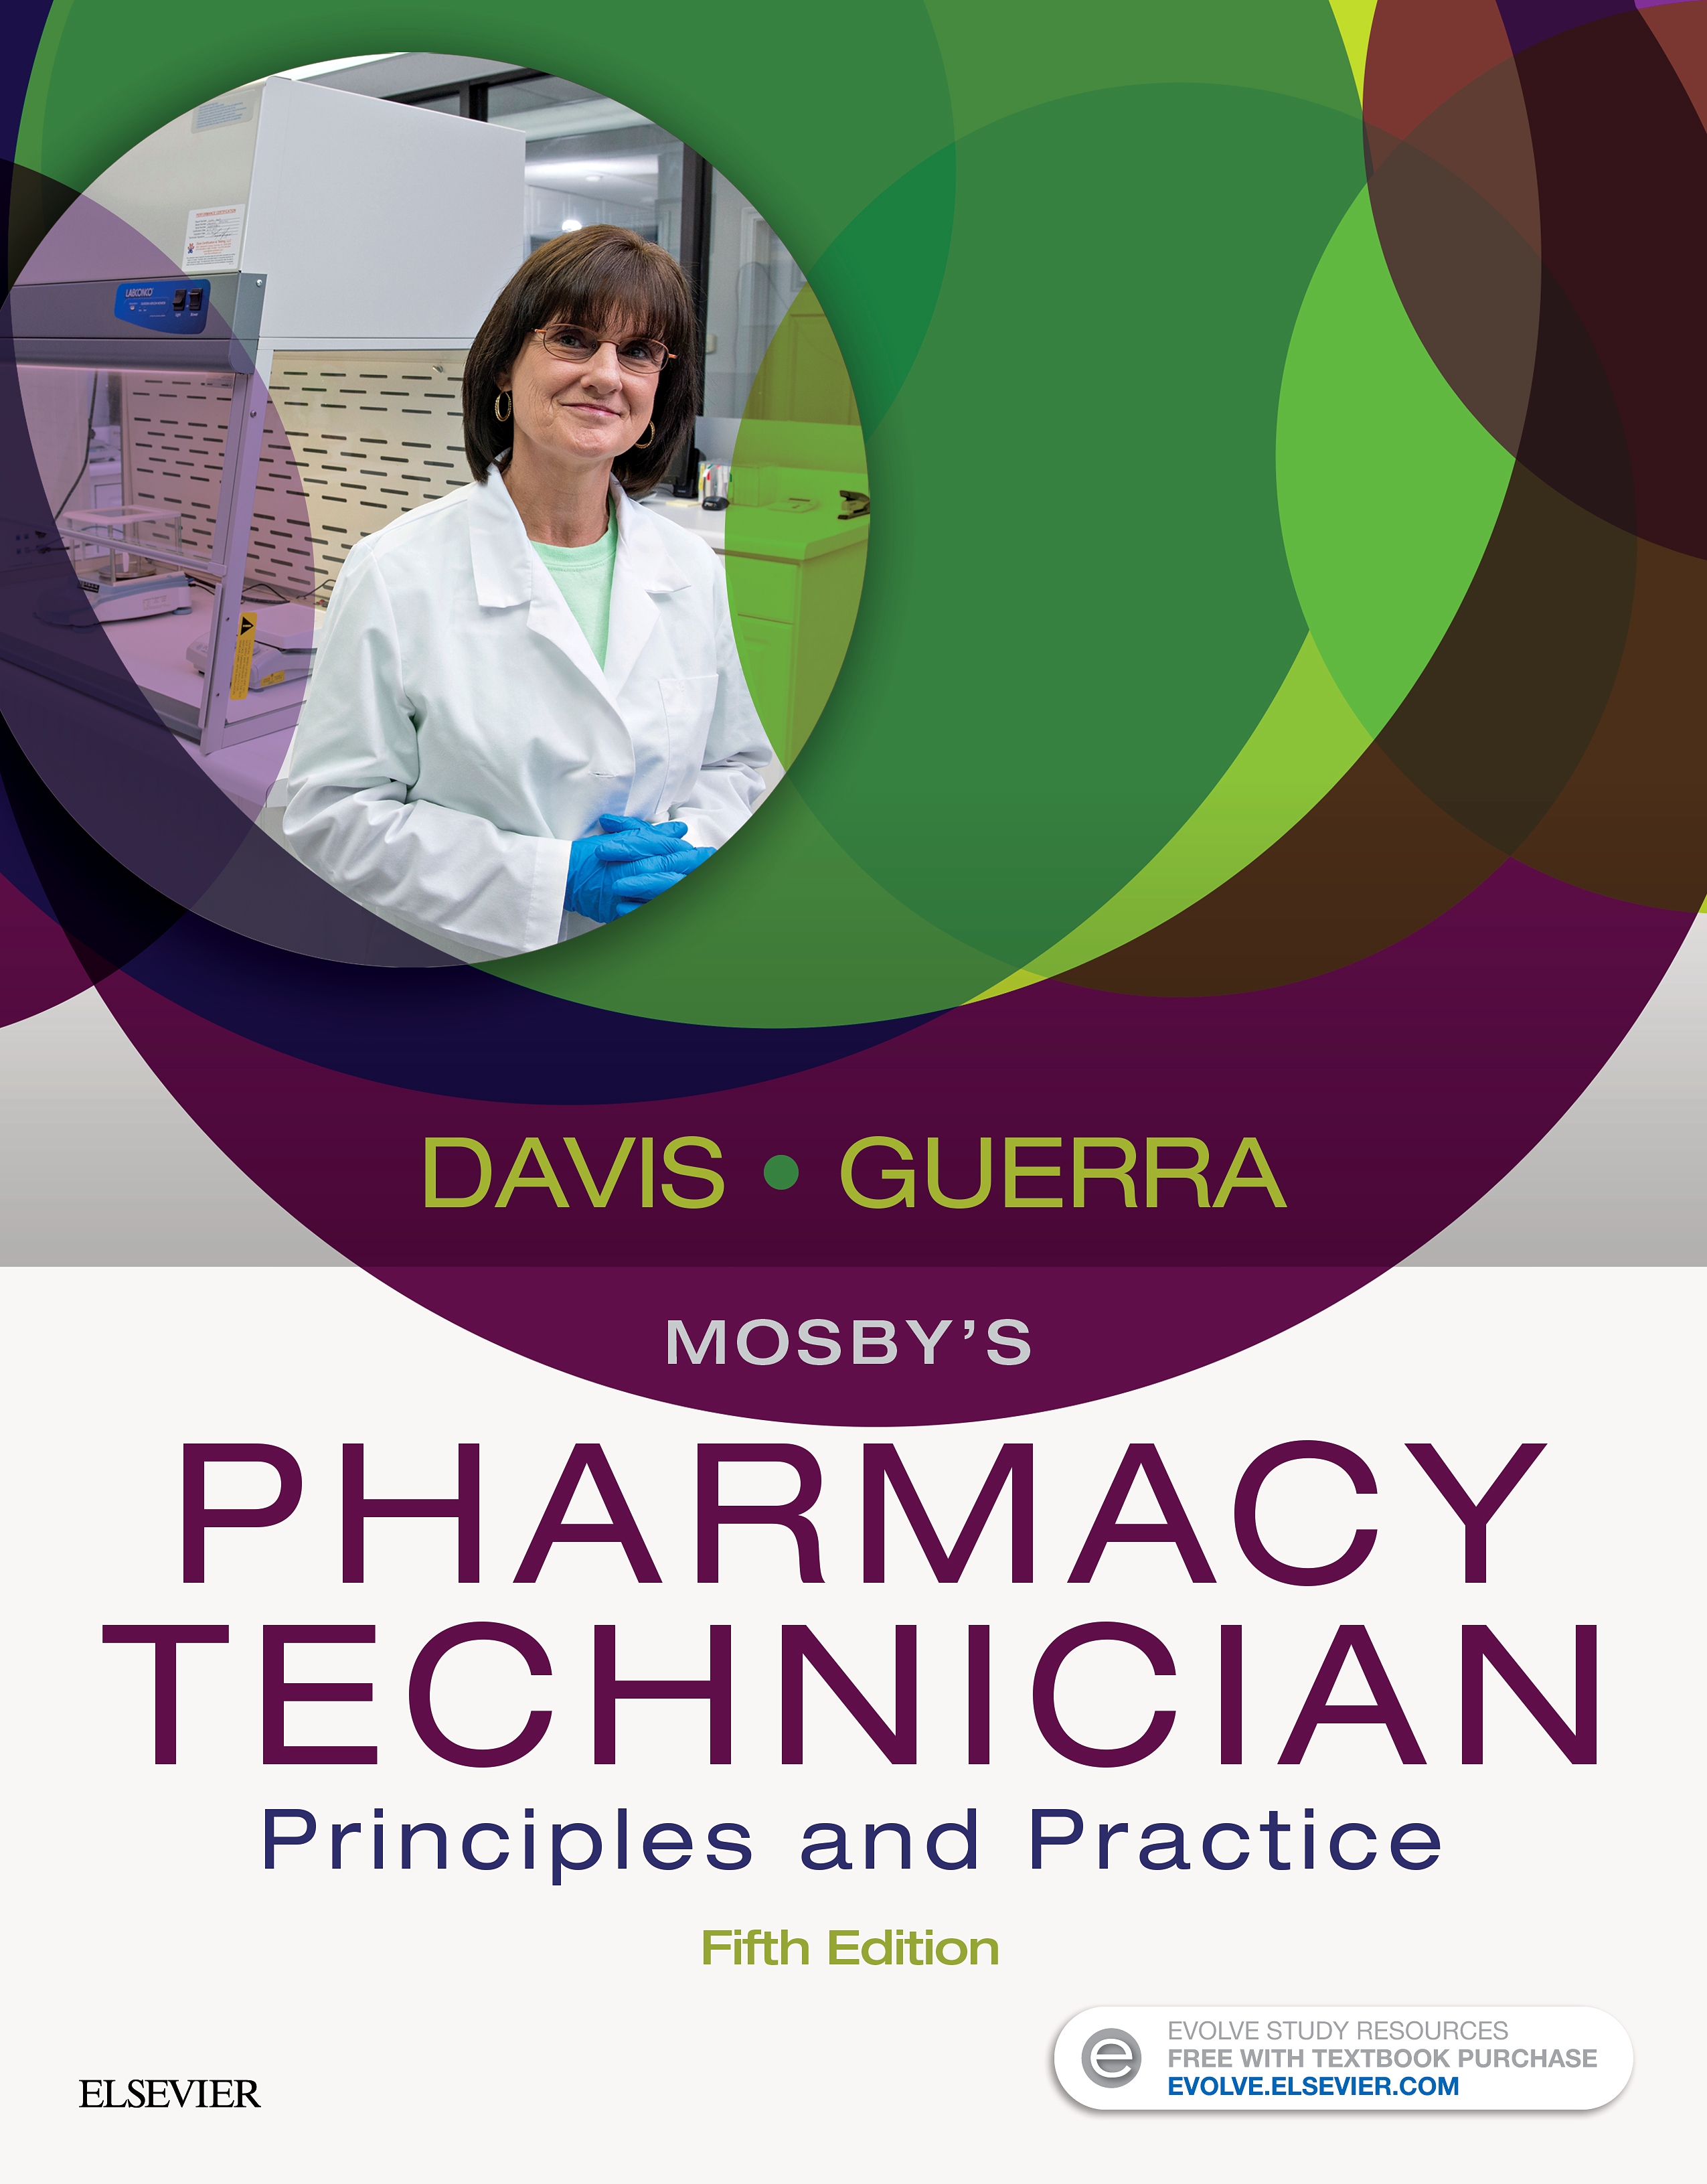 Evolve Resources for Mosby's Pharmacy Technician, 5th Edition